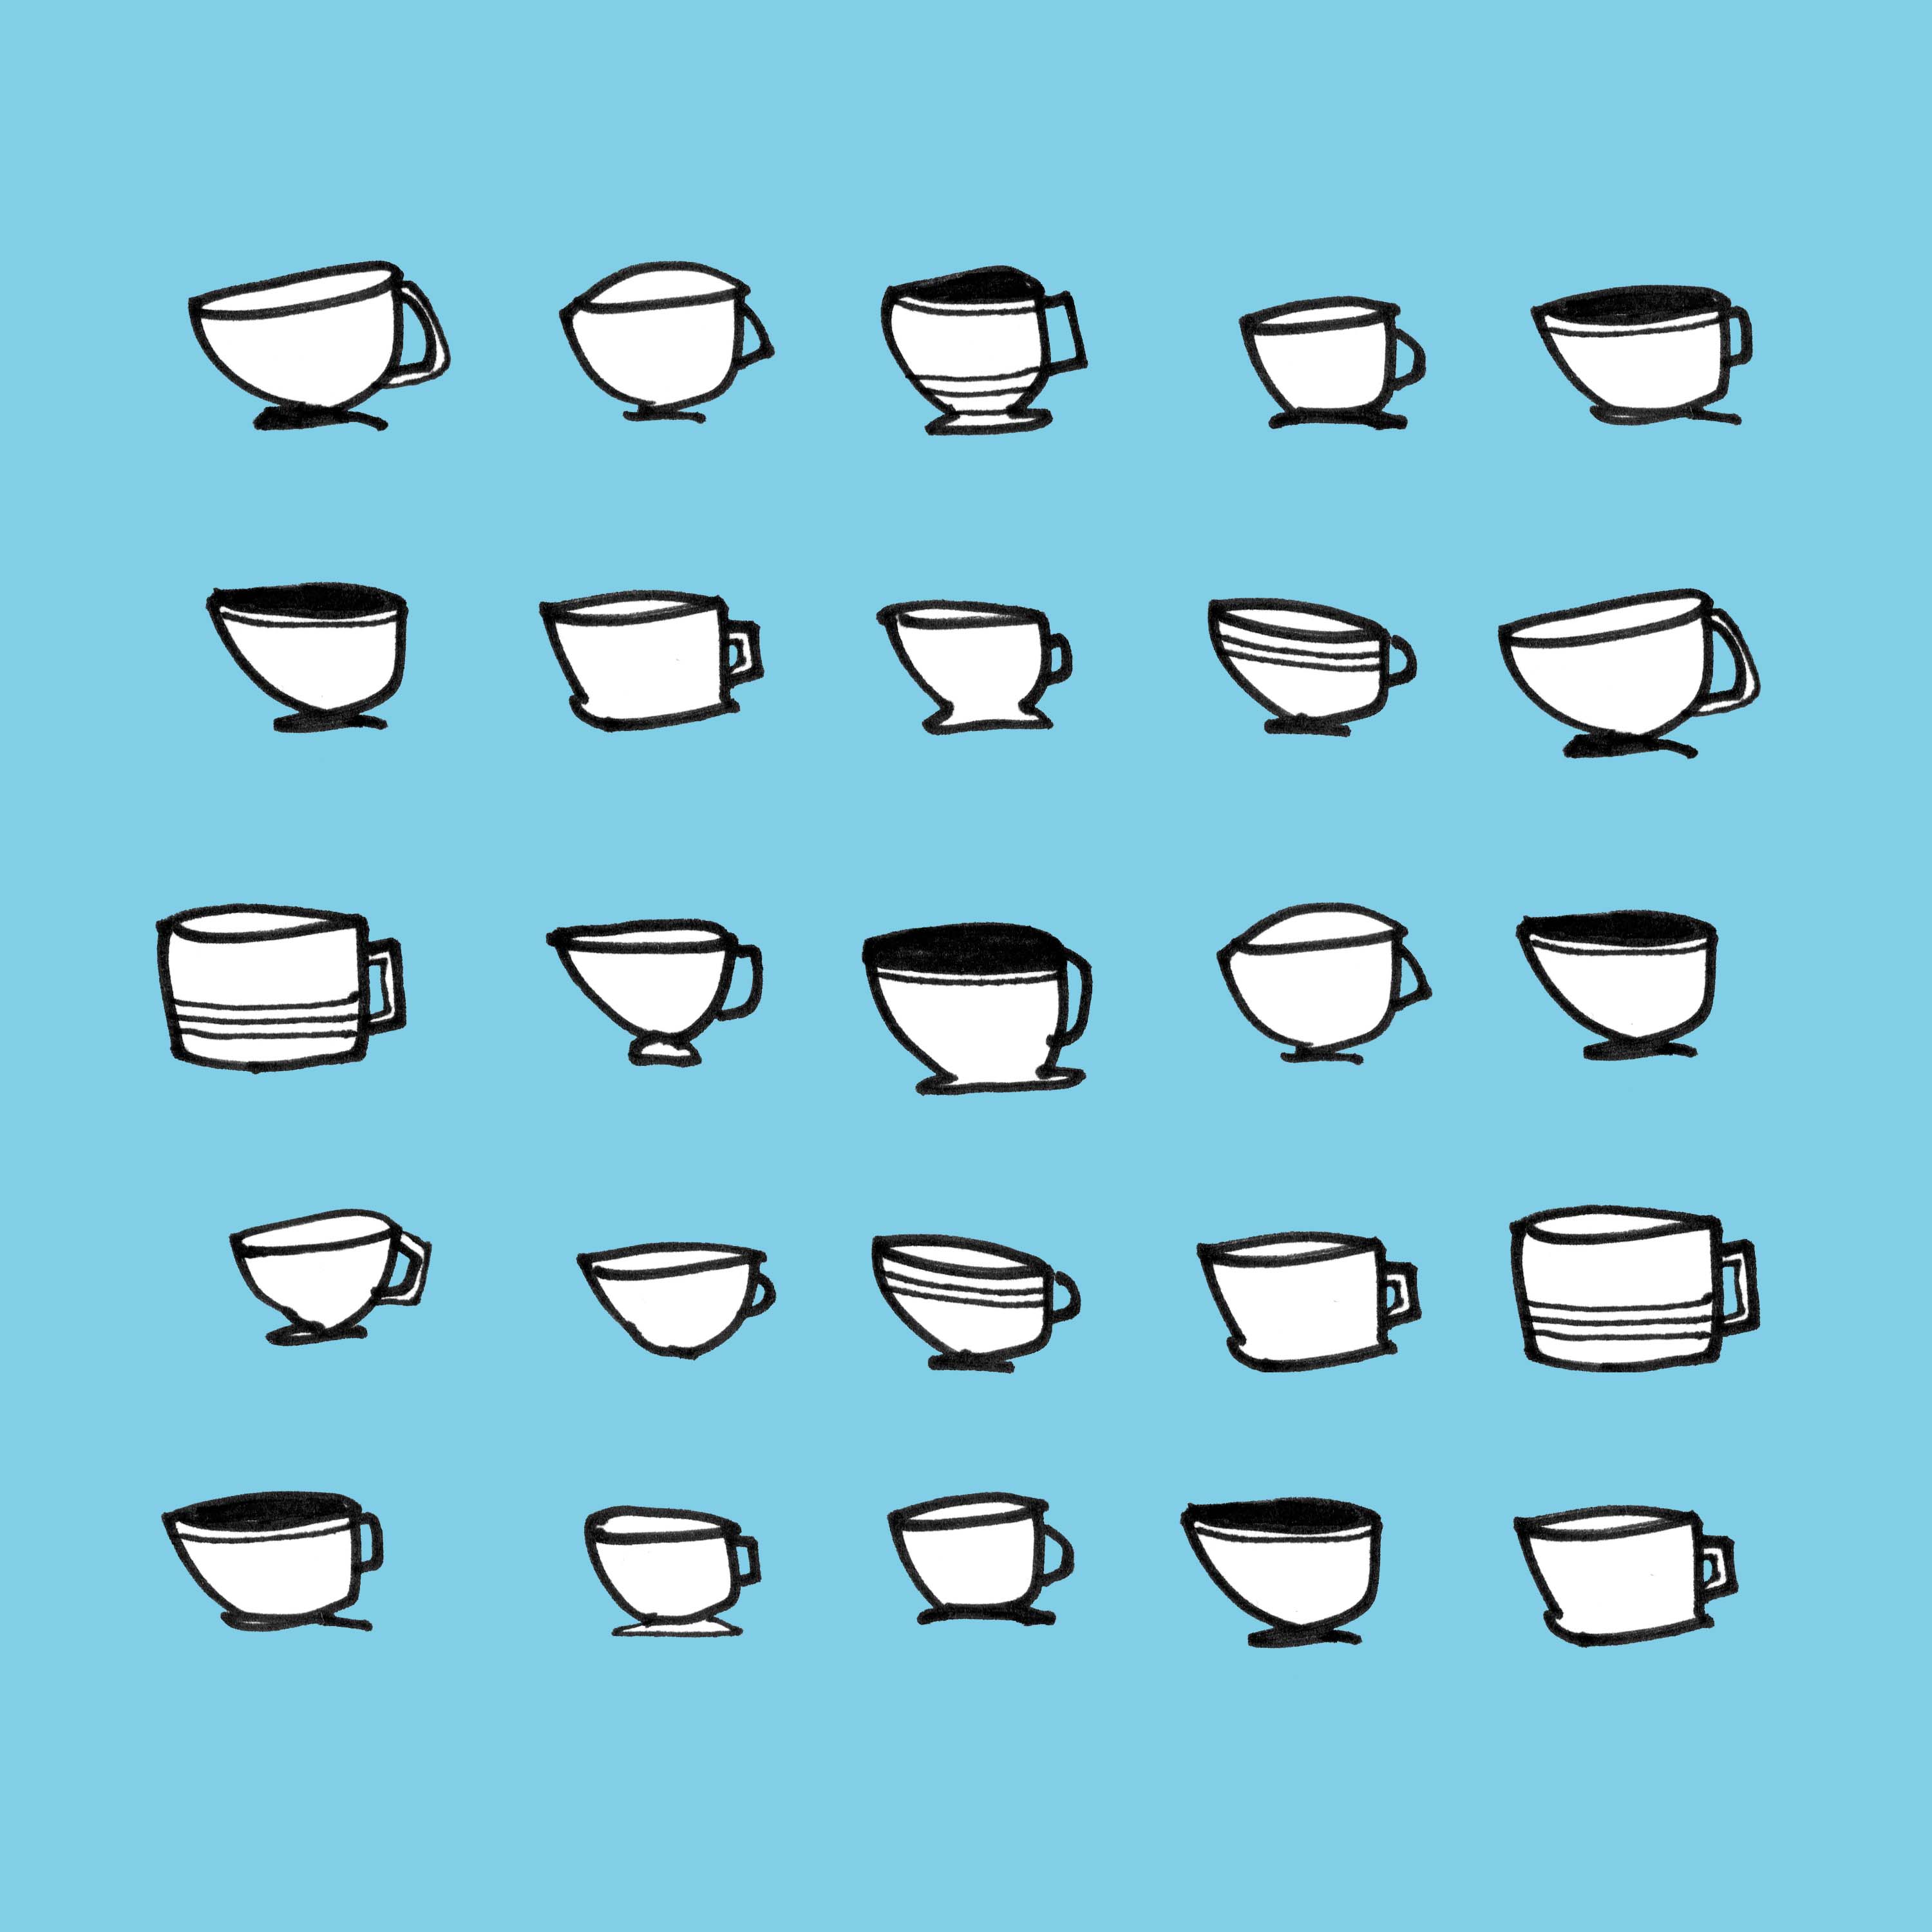 art every day number 128 / illustration / drawing / 25 cups (your coffee is here)